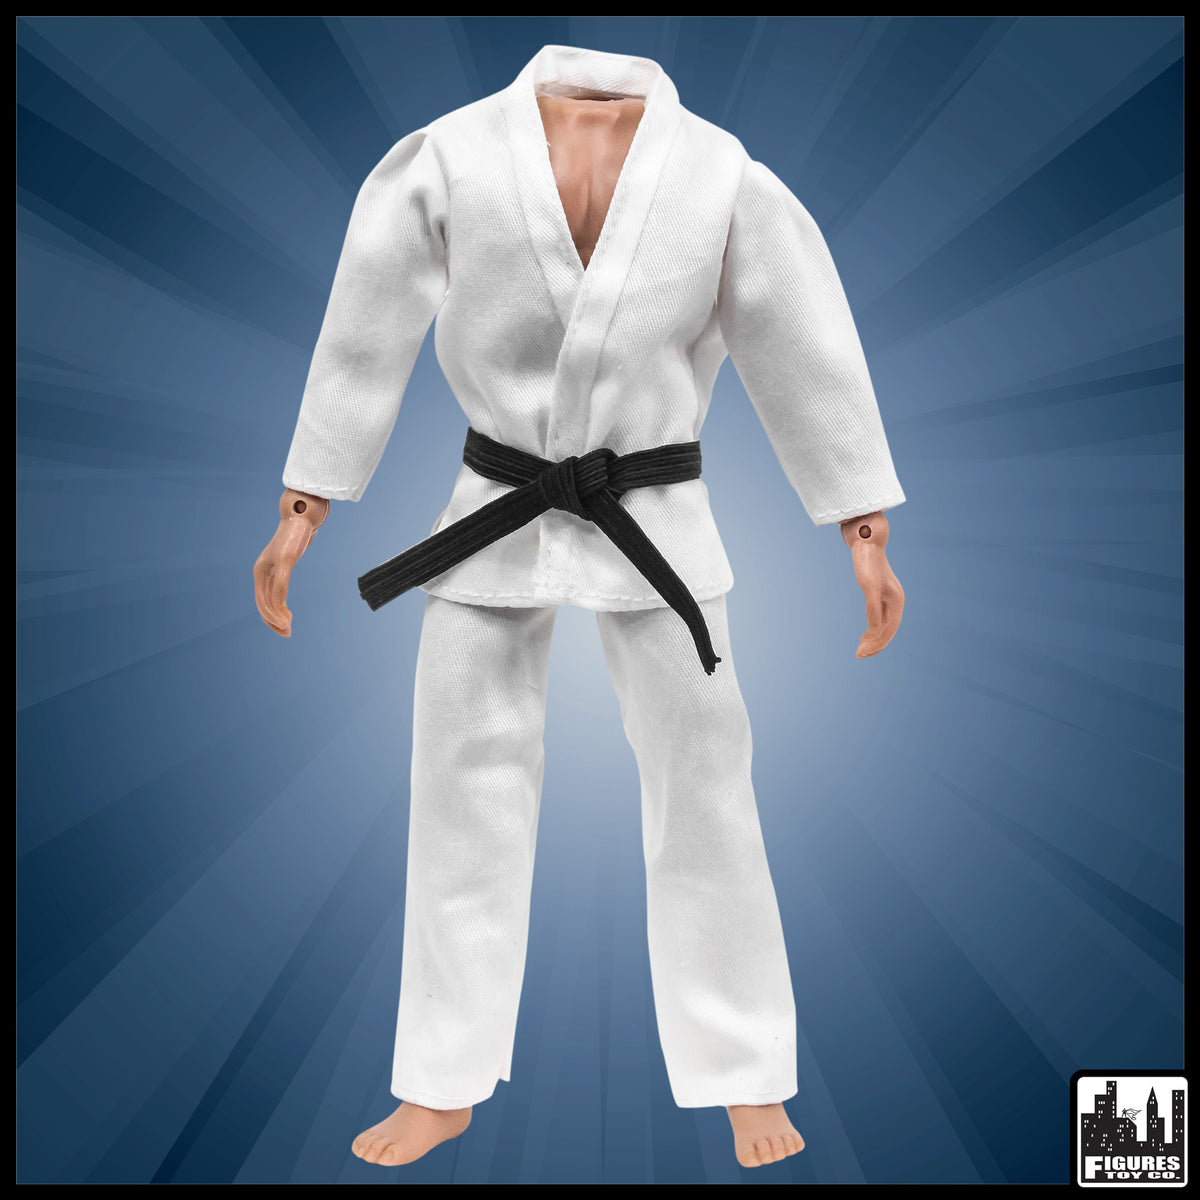 Karate Outfit for WWE Wrestling Action Figures